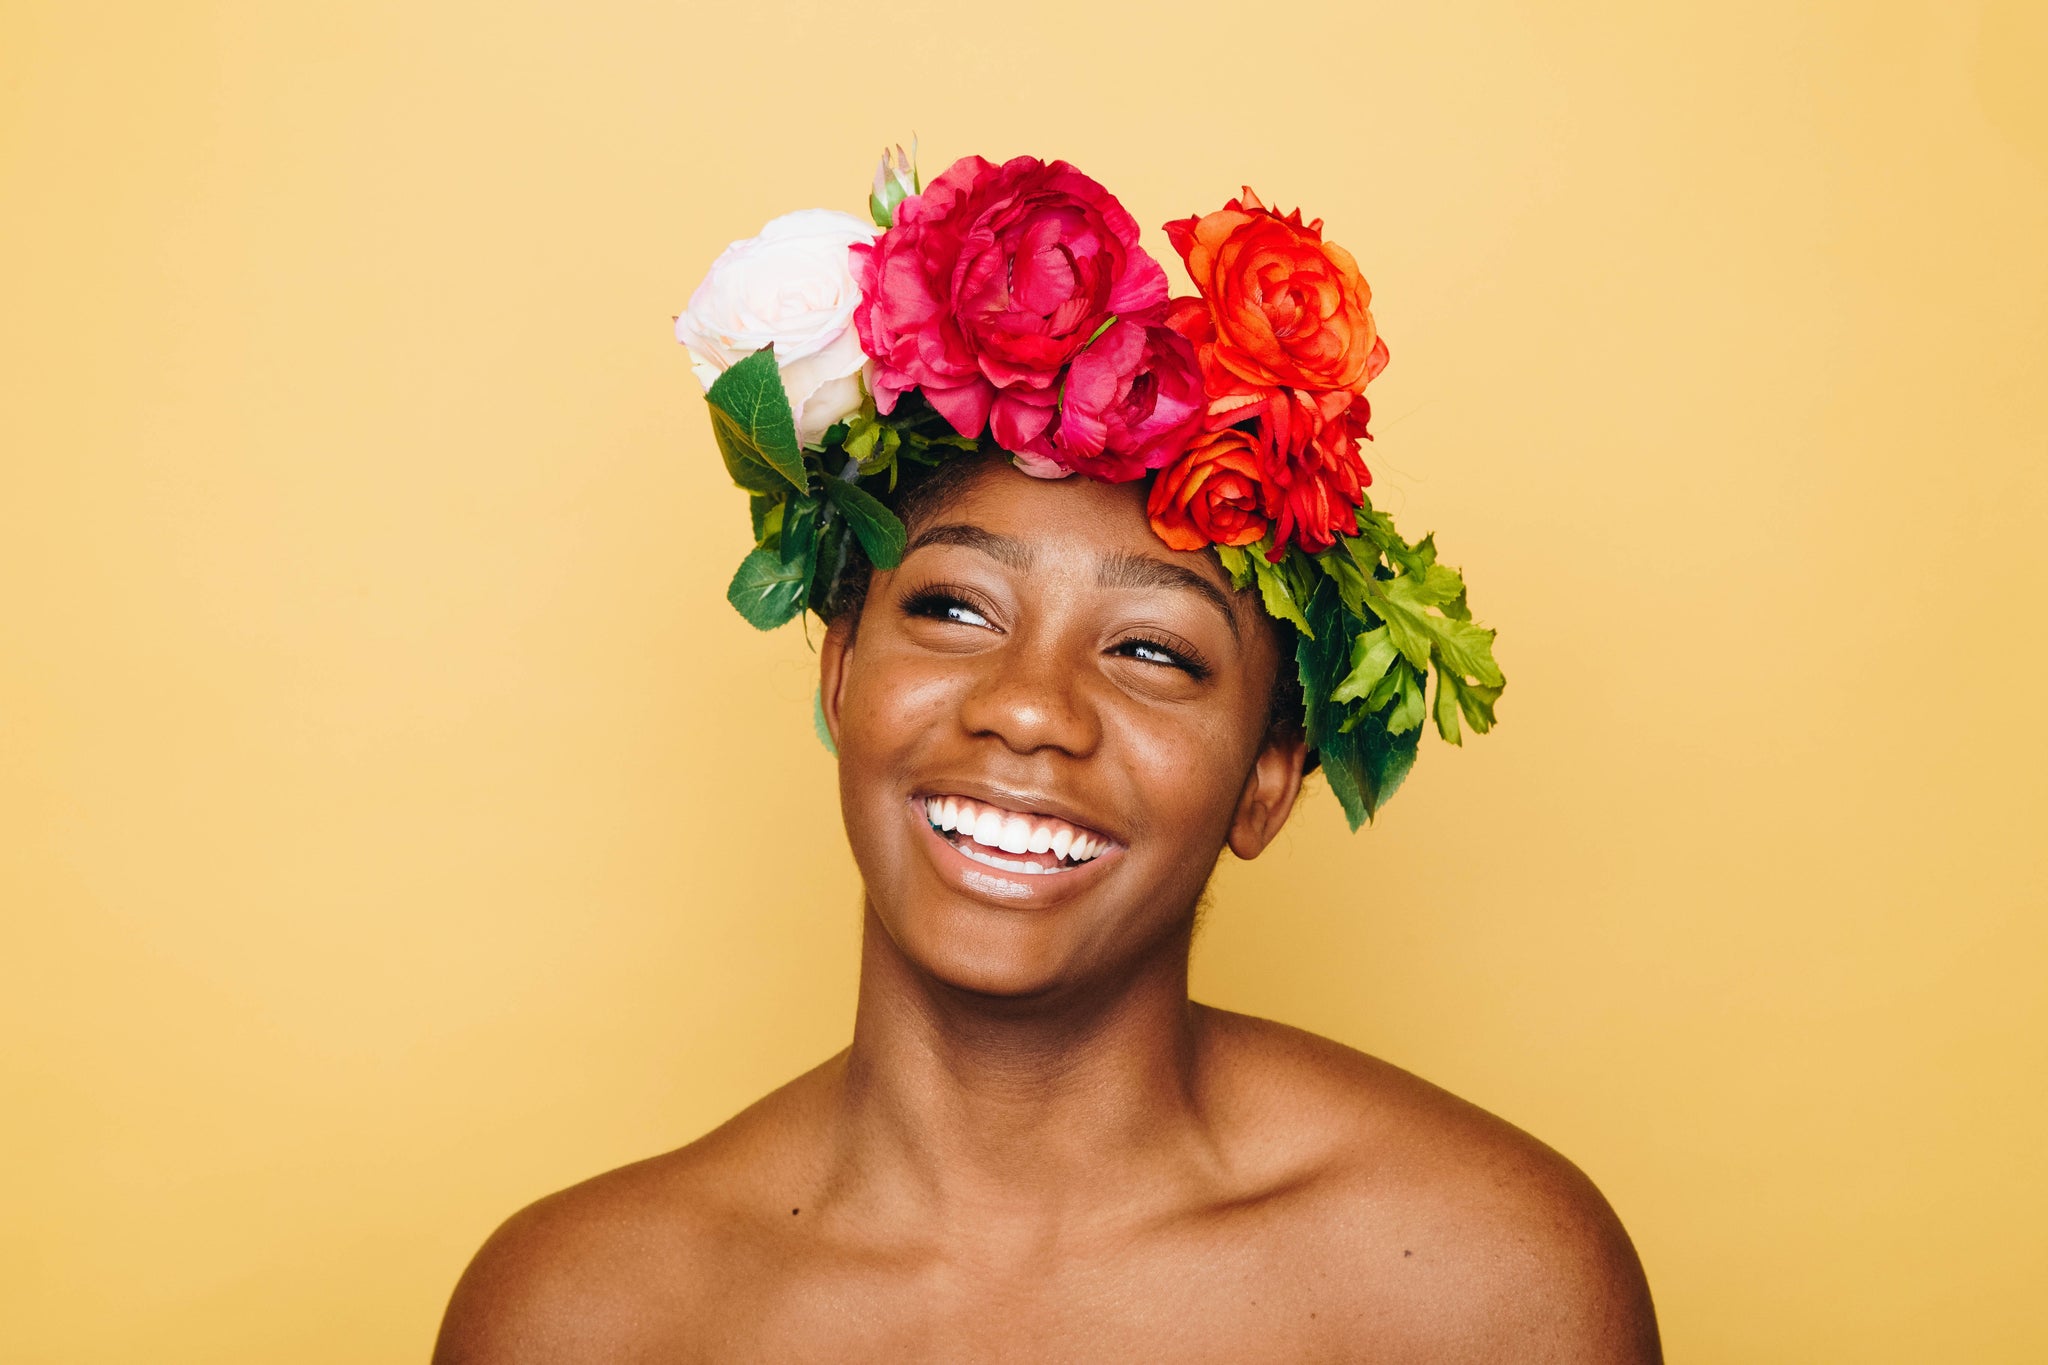 Ways to take care of your mental health when you have PCOS: person smiling wearing flower headpiece